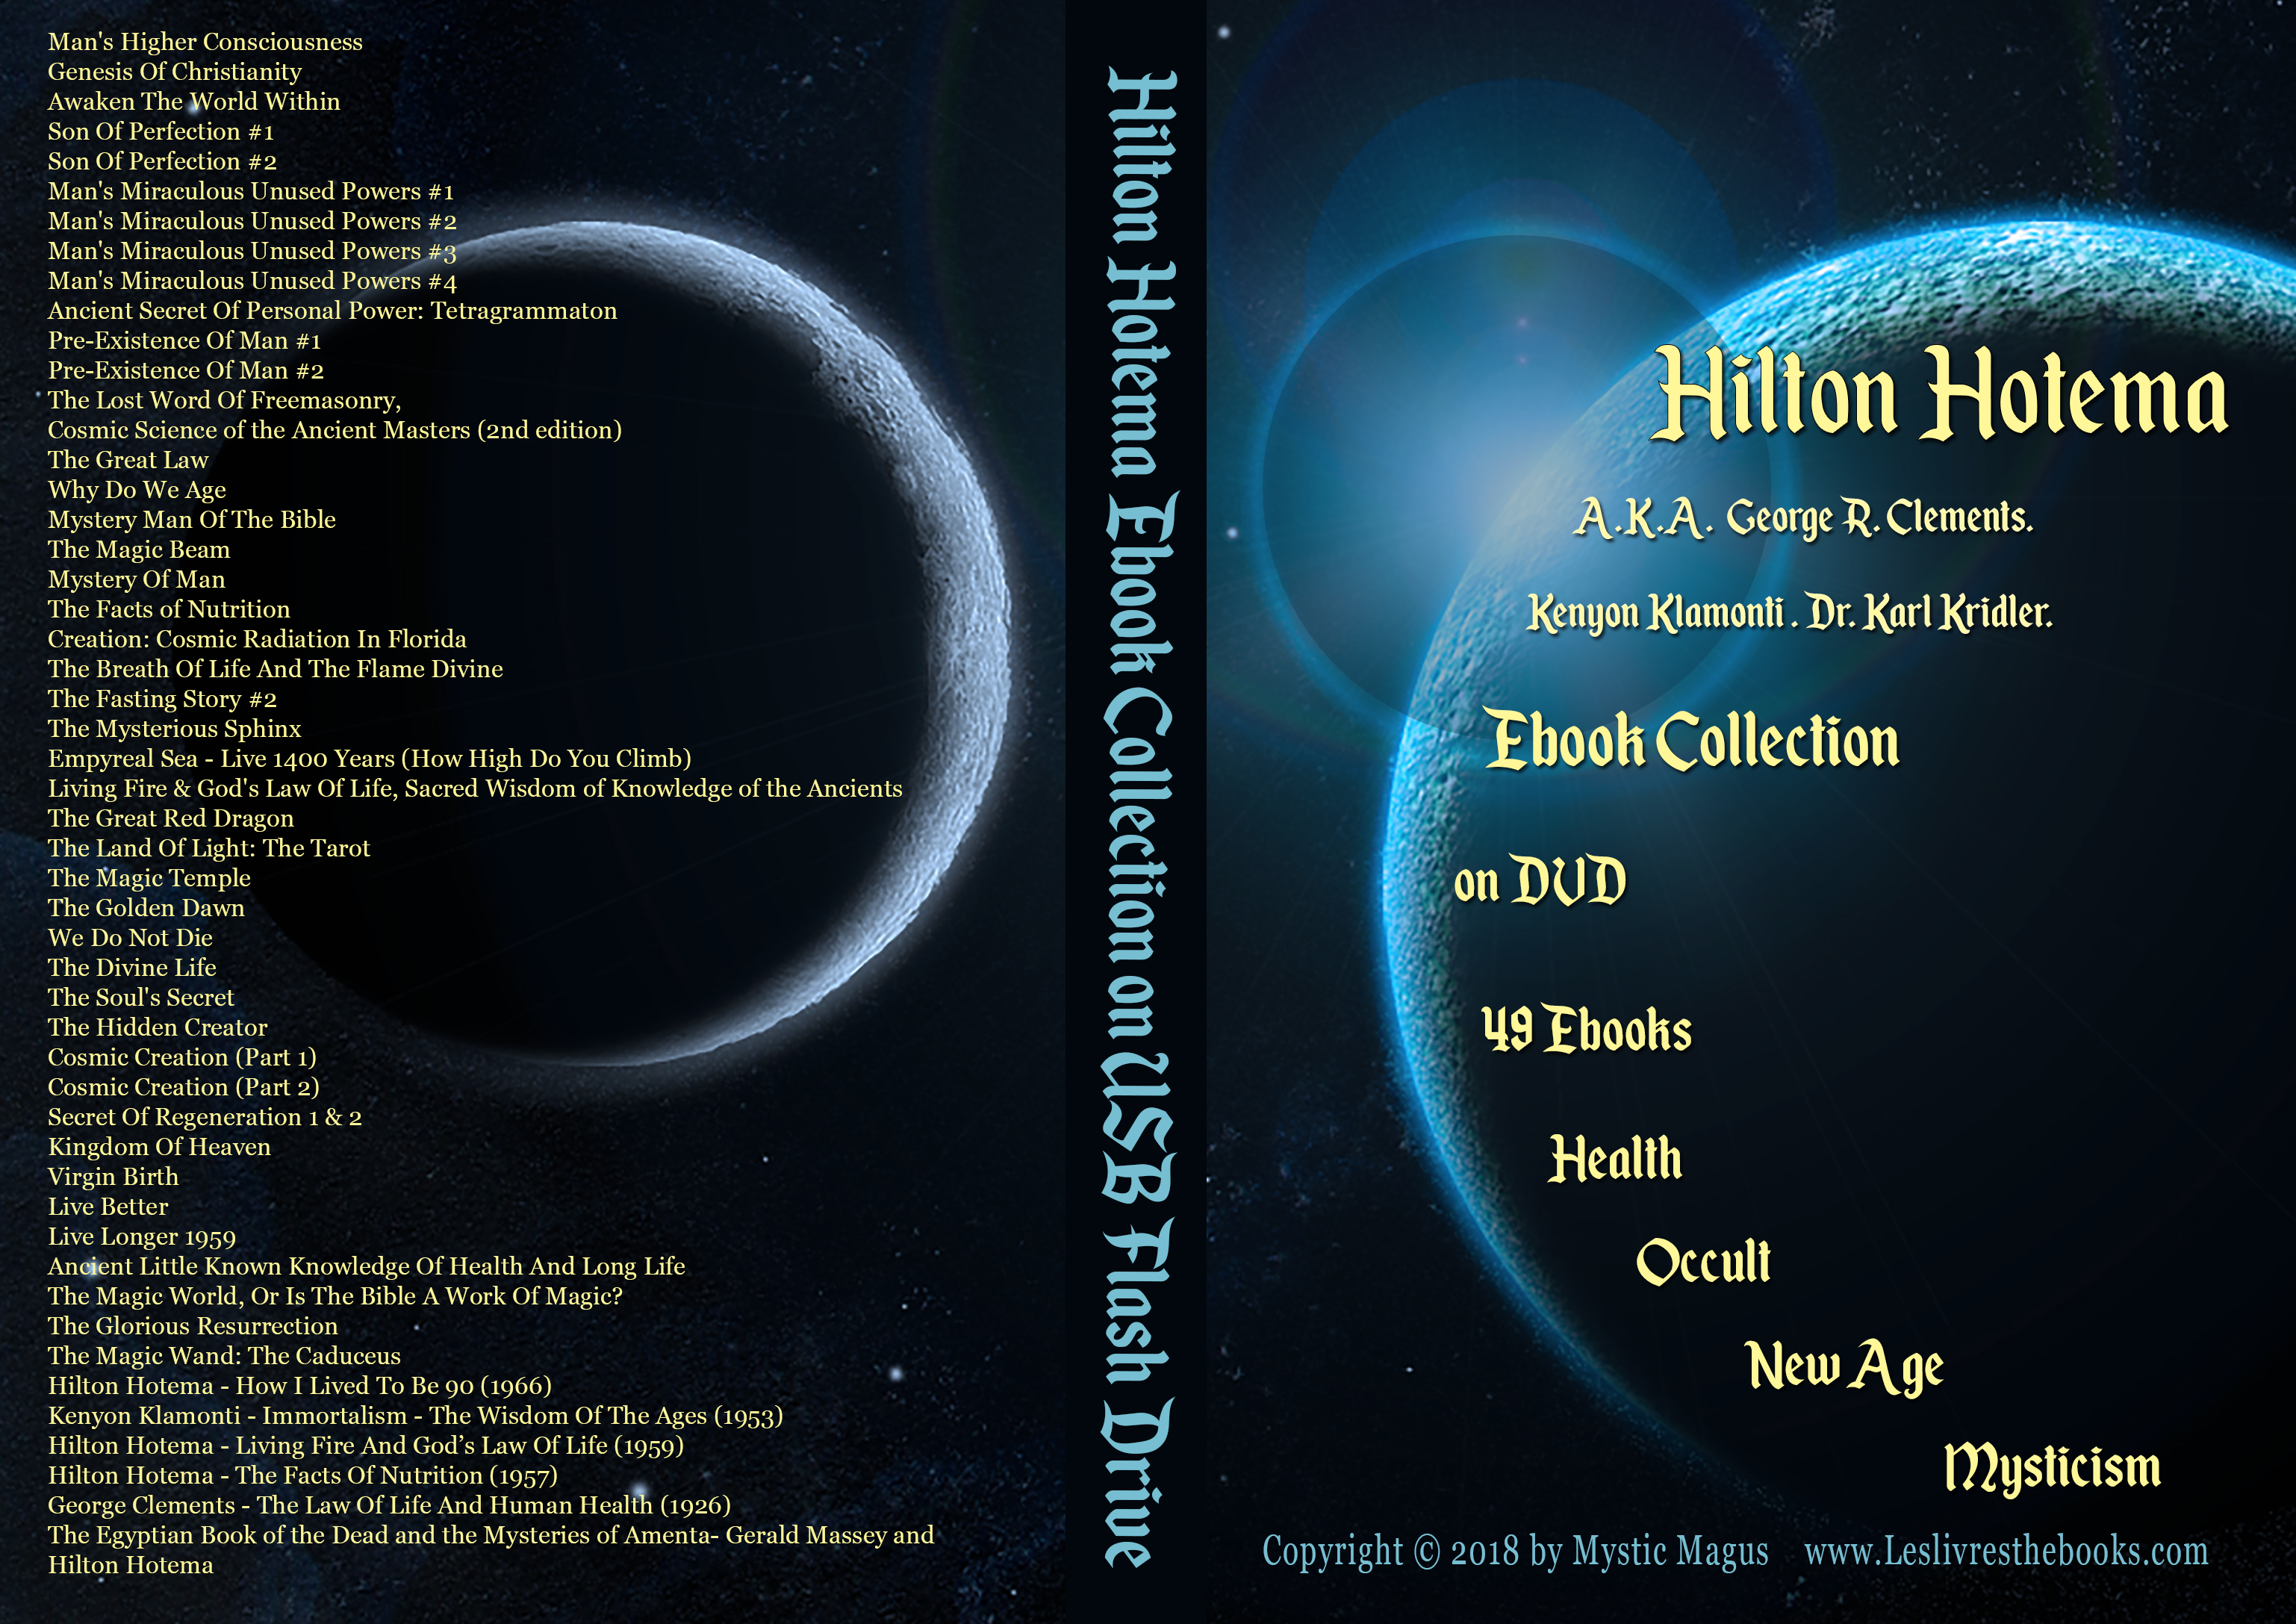 Image for Hilton Hotema Collection 49 EBooks On DVD. Man's Higher Consciousness, Why Do We Age, Magic Wand: The Caduceus,  Facts of Nutrition, Tetragrammaton, Golden Dawn, Awaken the World Within, and many more!